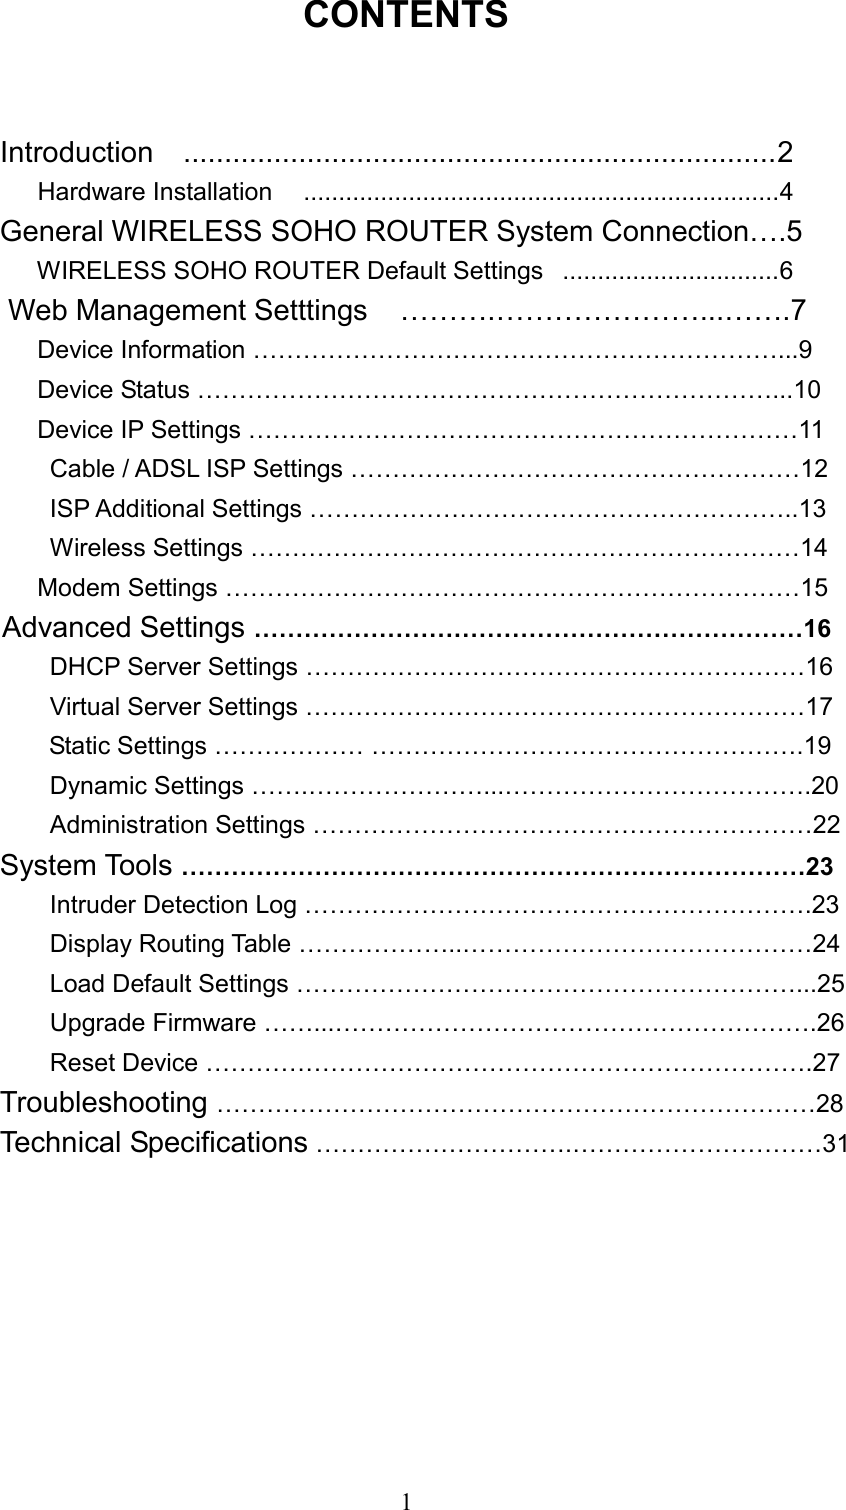  1CONTENTS  Introduction  ........................................................................2    Hardware Installation   ....................................................................4 General WIRELESS SOHO ROUTER System Connection….5       WIRELESS SOHO ROUTER Default Settings  ...............................6 Web Management Setttings    ……….…………………...…….7        Device Information ………………………………………………………...9        Device Status ……………………………………………………………...10    Device IP Settings …………………………………………………………11         Cable / ADSL ISP Settings ………………………………………………12         ISP Additional Settings …………………………………………………..13        Wireless Settings …………………………………………………………14          Modem Settings ……………………………………………………………15     Advanced Settings …………………………………………………………16         DHCP Server Settings ……………………………………………………16         Virtual Server Settings ……………………………………………………17        Static Settings ……………… …………………………………………….19         Dynamic Settings …….…………………...……………………………….20         Administration Settings ……………………………………………………22     System Tools …………………………………………………………………23         Intruder Detection Log …………………………………………………….23         Display Routing Table ………………..……………………………………24         Load Default Settings ……………………………………………………...25         Upgrade Firmware ……...………………………………………………….26        Reset Device ……………………………………………………………….27     Troubleshooting ………………………………………………………………28     Technical Specifications ………………………….…………………………31         